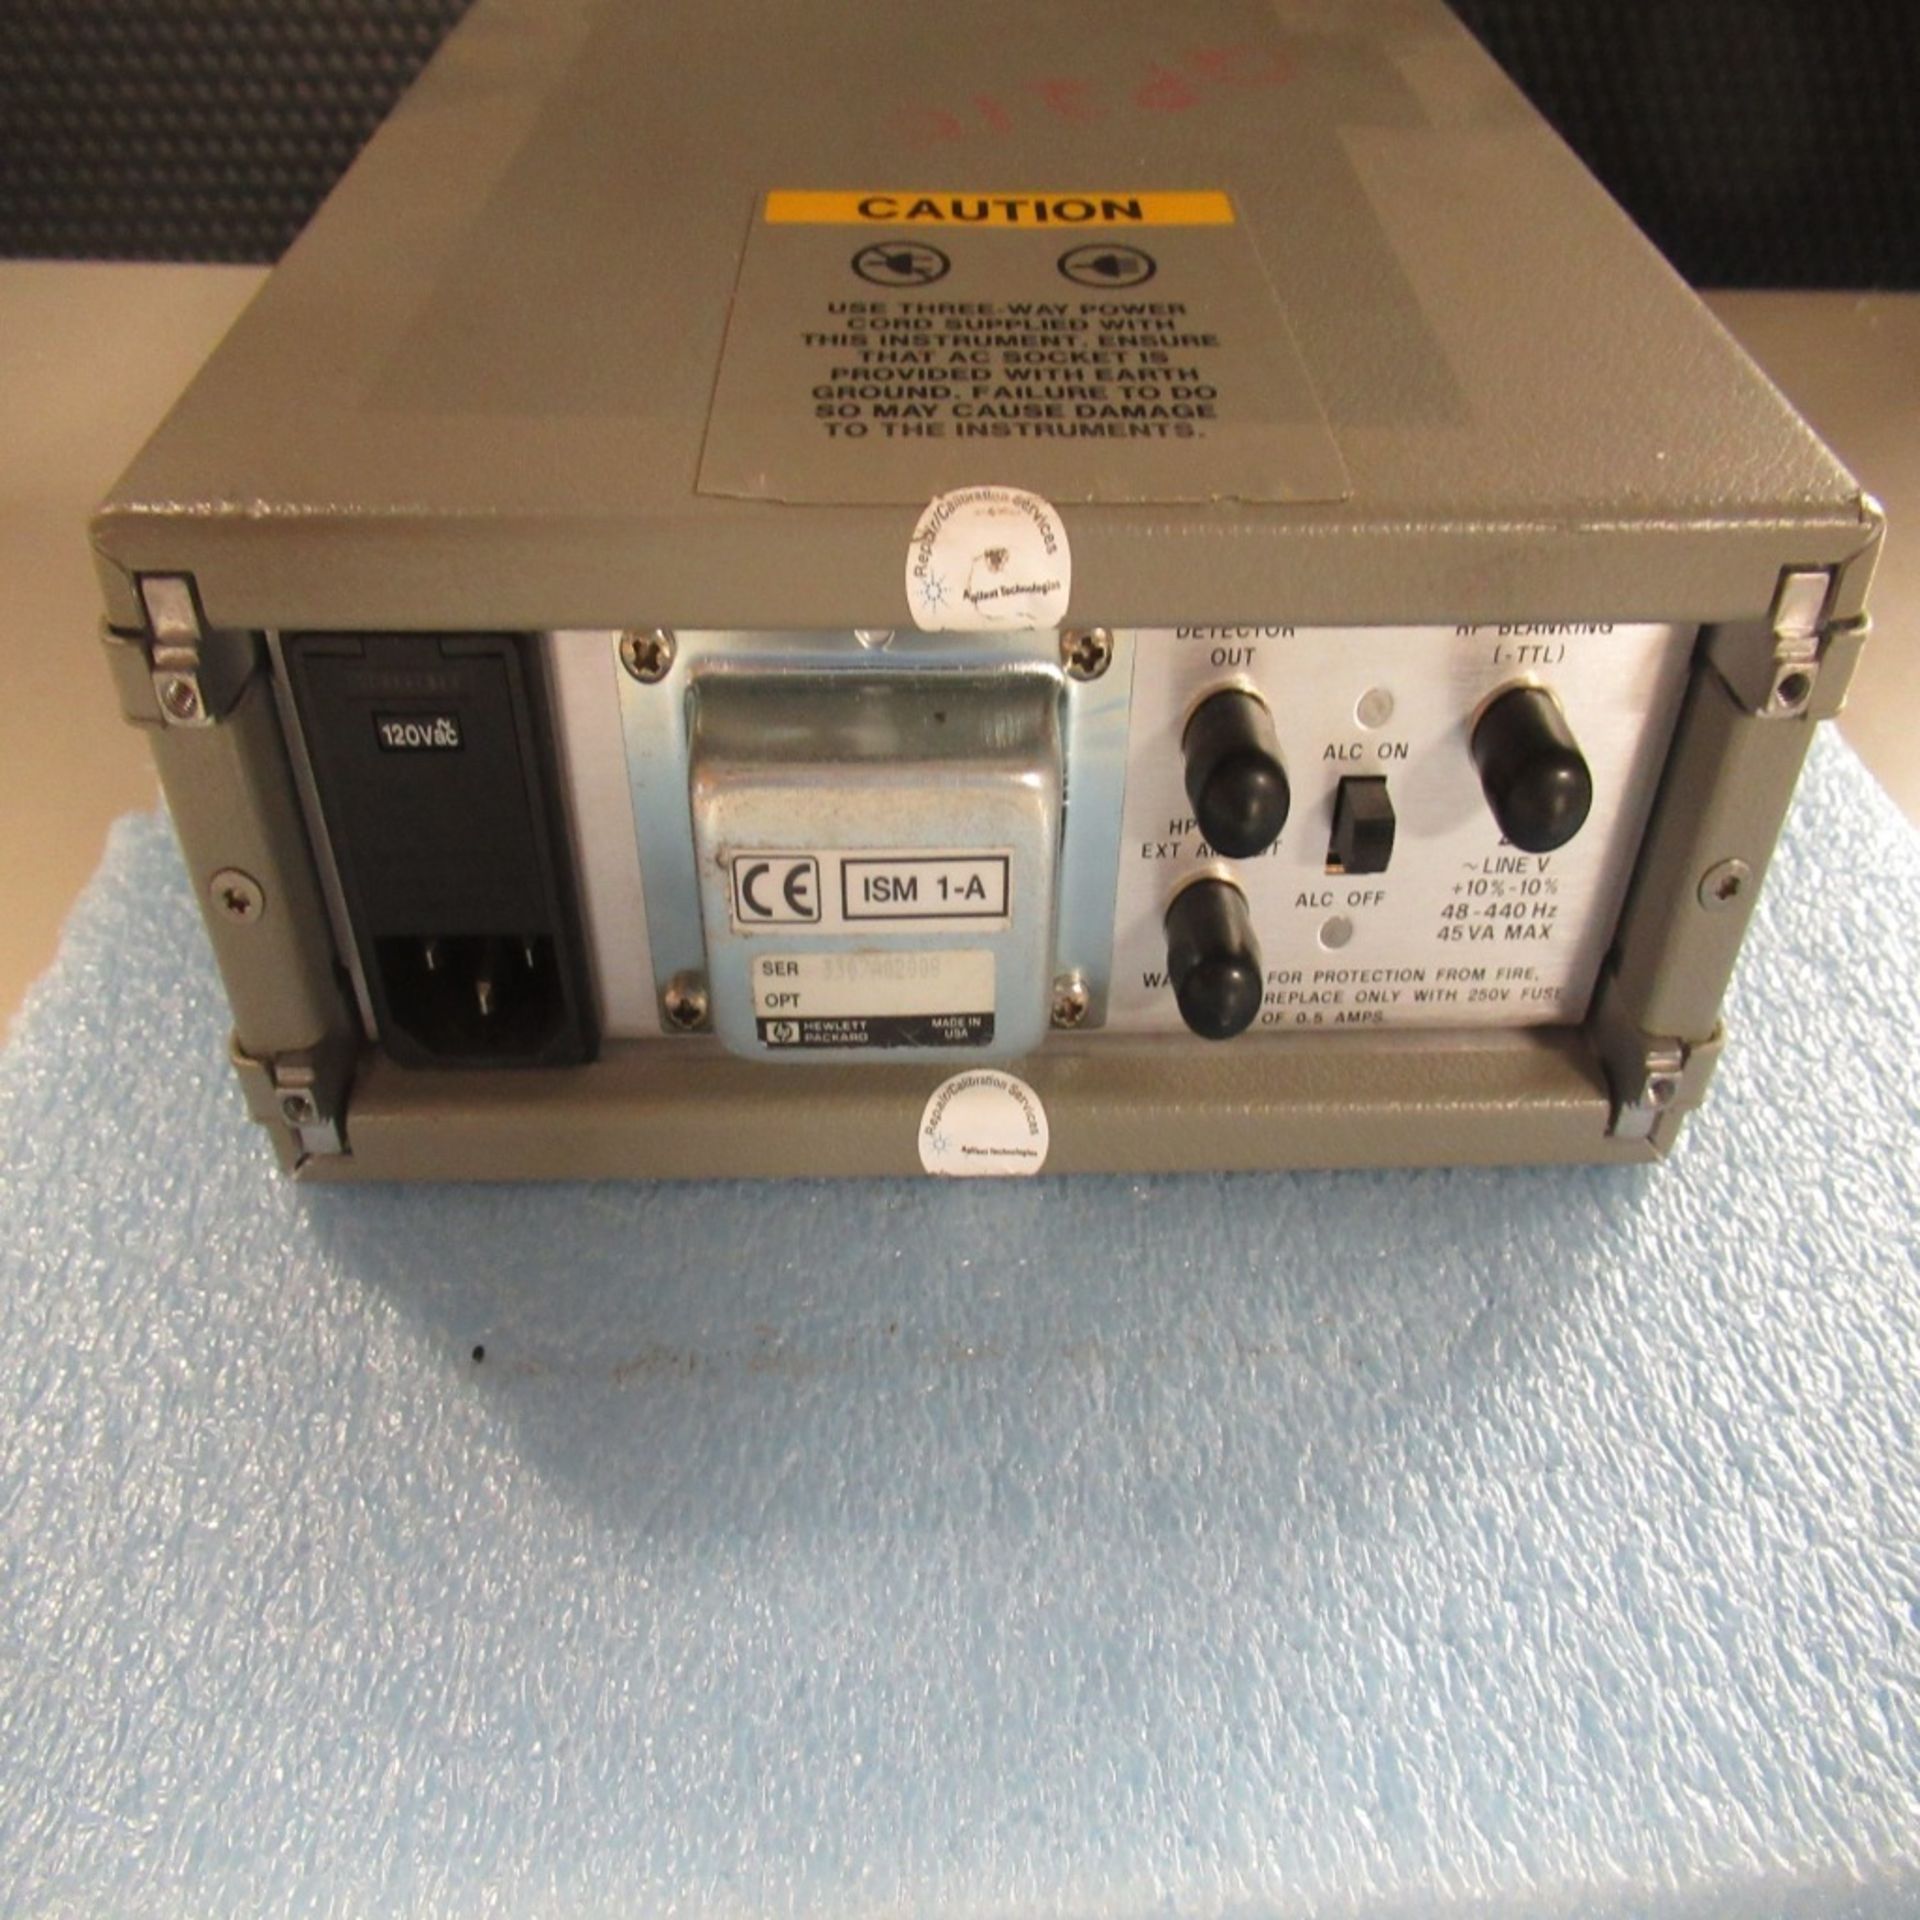 PHOTON SNAP SHOT MODEL 6000 *POWERS ON* NO SCREEN DISPLAY; FARNELL AP20-80 REGULATED POWER SUPPLY * - Image 189 of 222